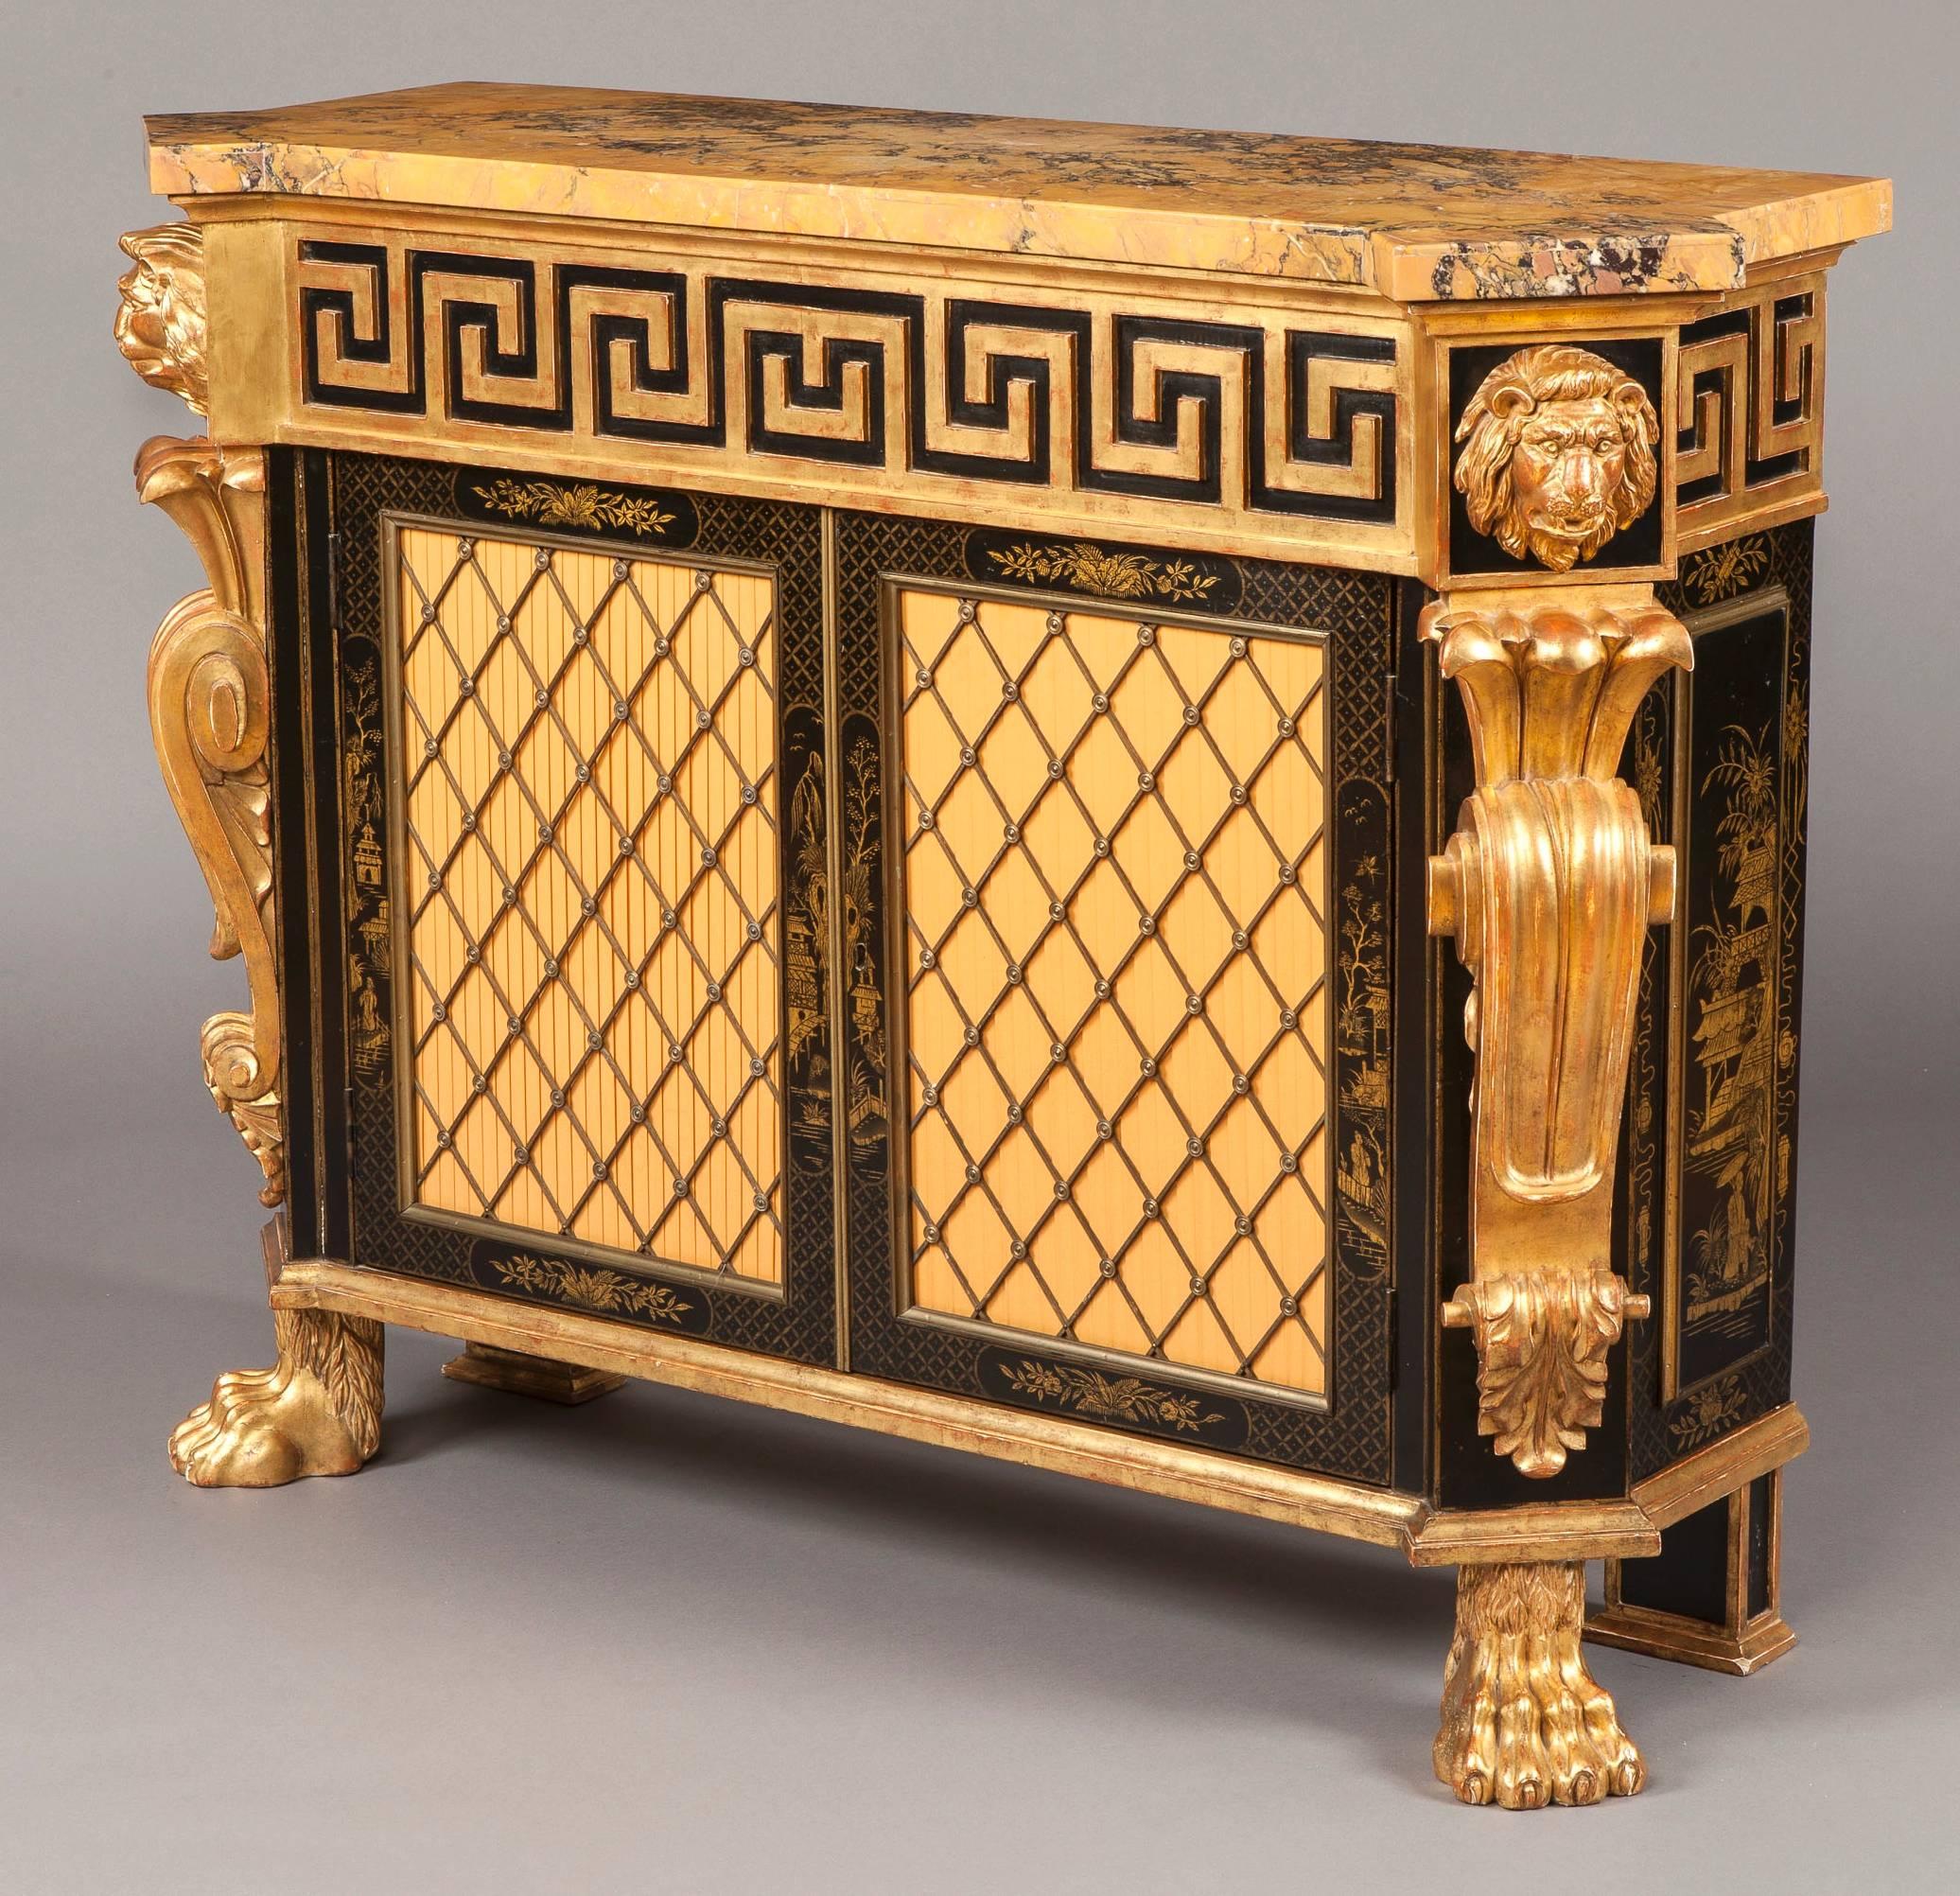 Rising from, to the front, gilded lions paw feet, to the rear fielded panel block legs, the cabinets, having a ground decoration in the stylized Chinoiserie manner, with figures in landscapes and court scenes; the cabinet doors with brass trellis